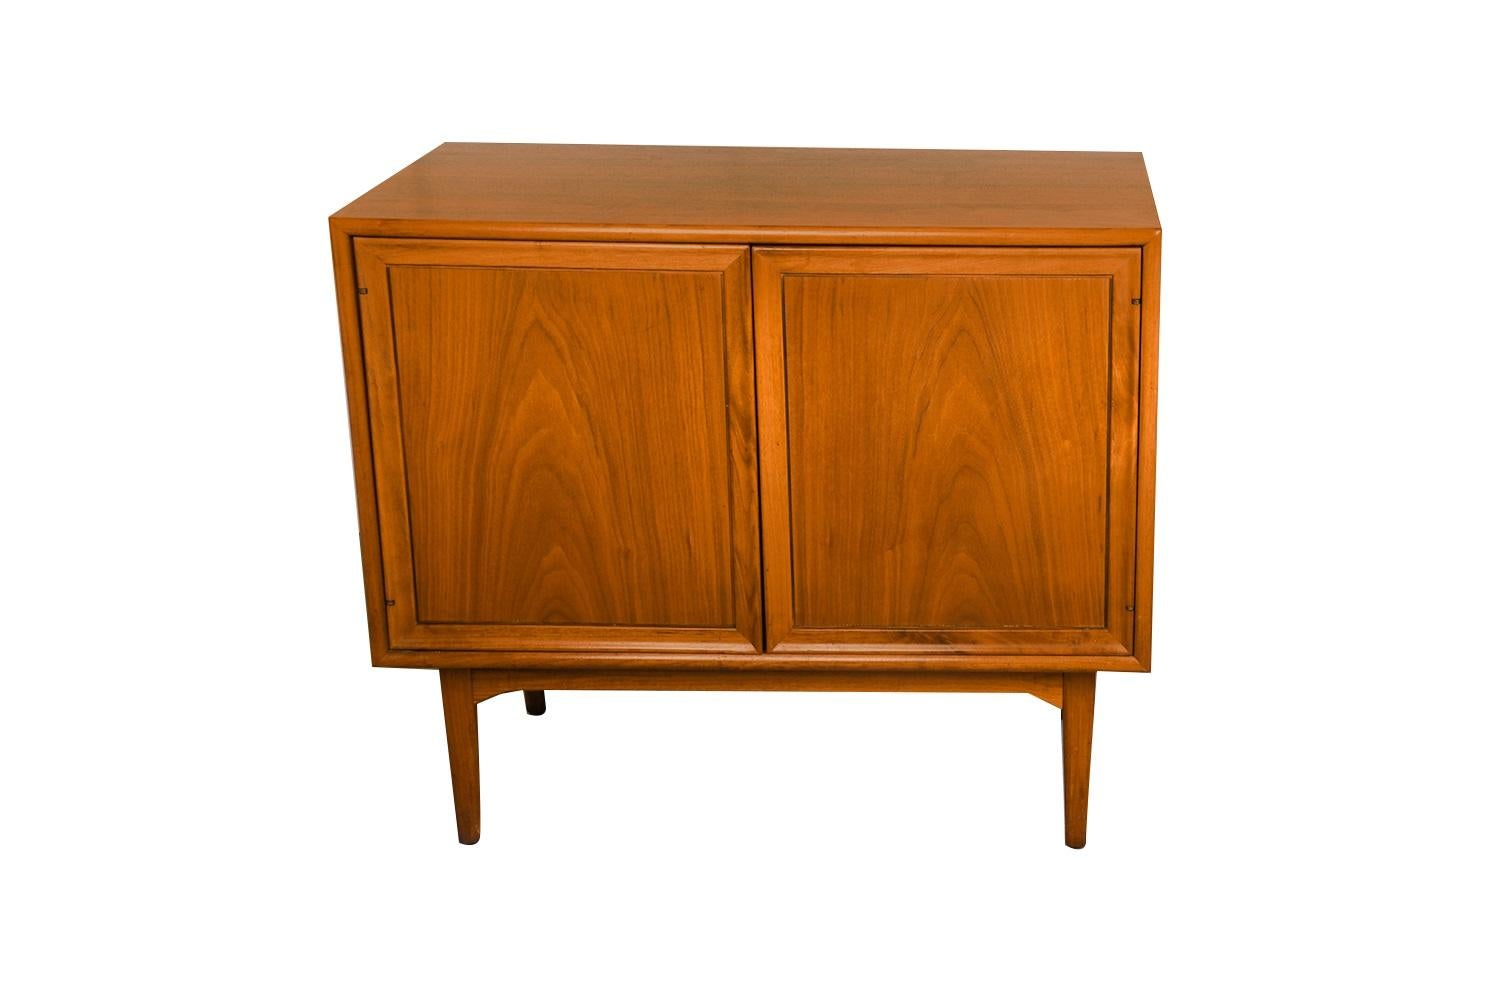 Beautiful Mid-Century Modern richly grained walnut double door cabinet designed by Kipp Stewart and Stewart MacDougall for Drexel’s Declaration Collection, circa 1960’s. Expertly crafted, remaining in clean vintage condition with a solid,